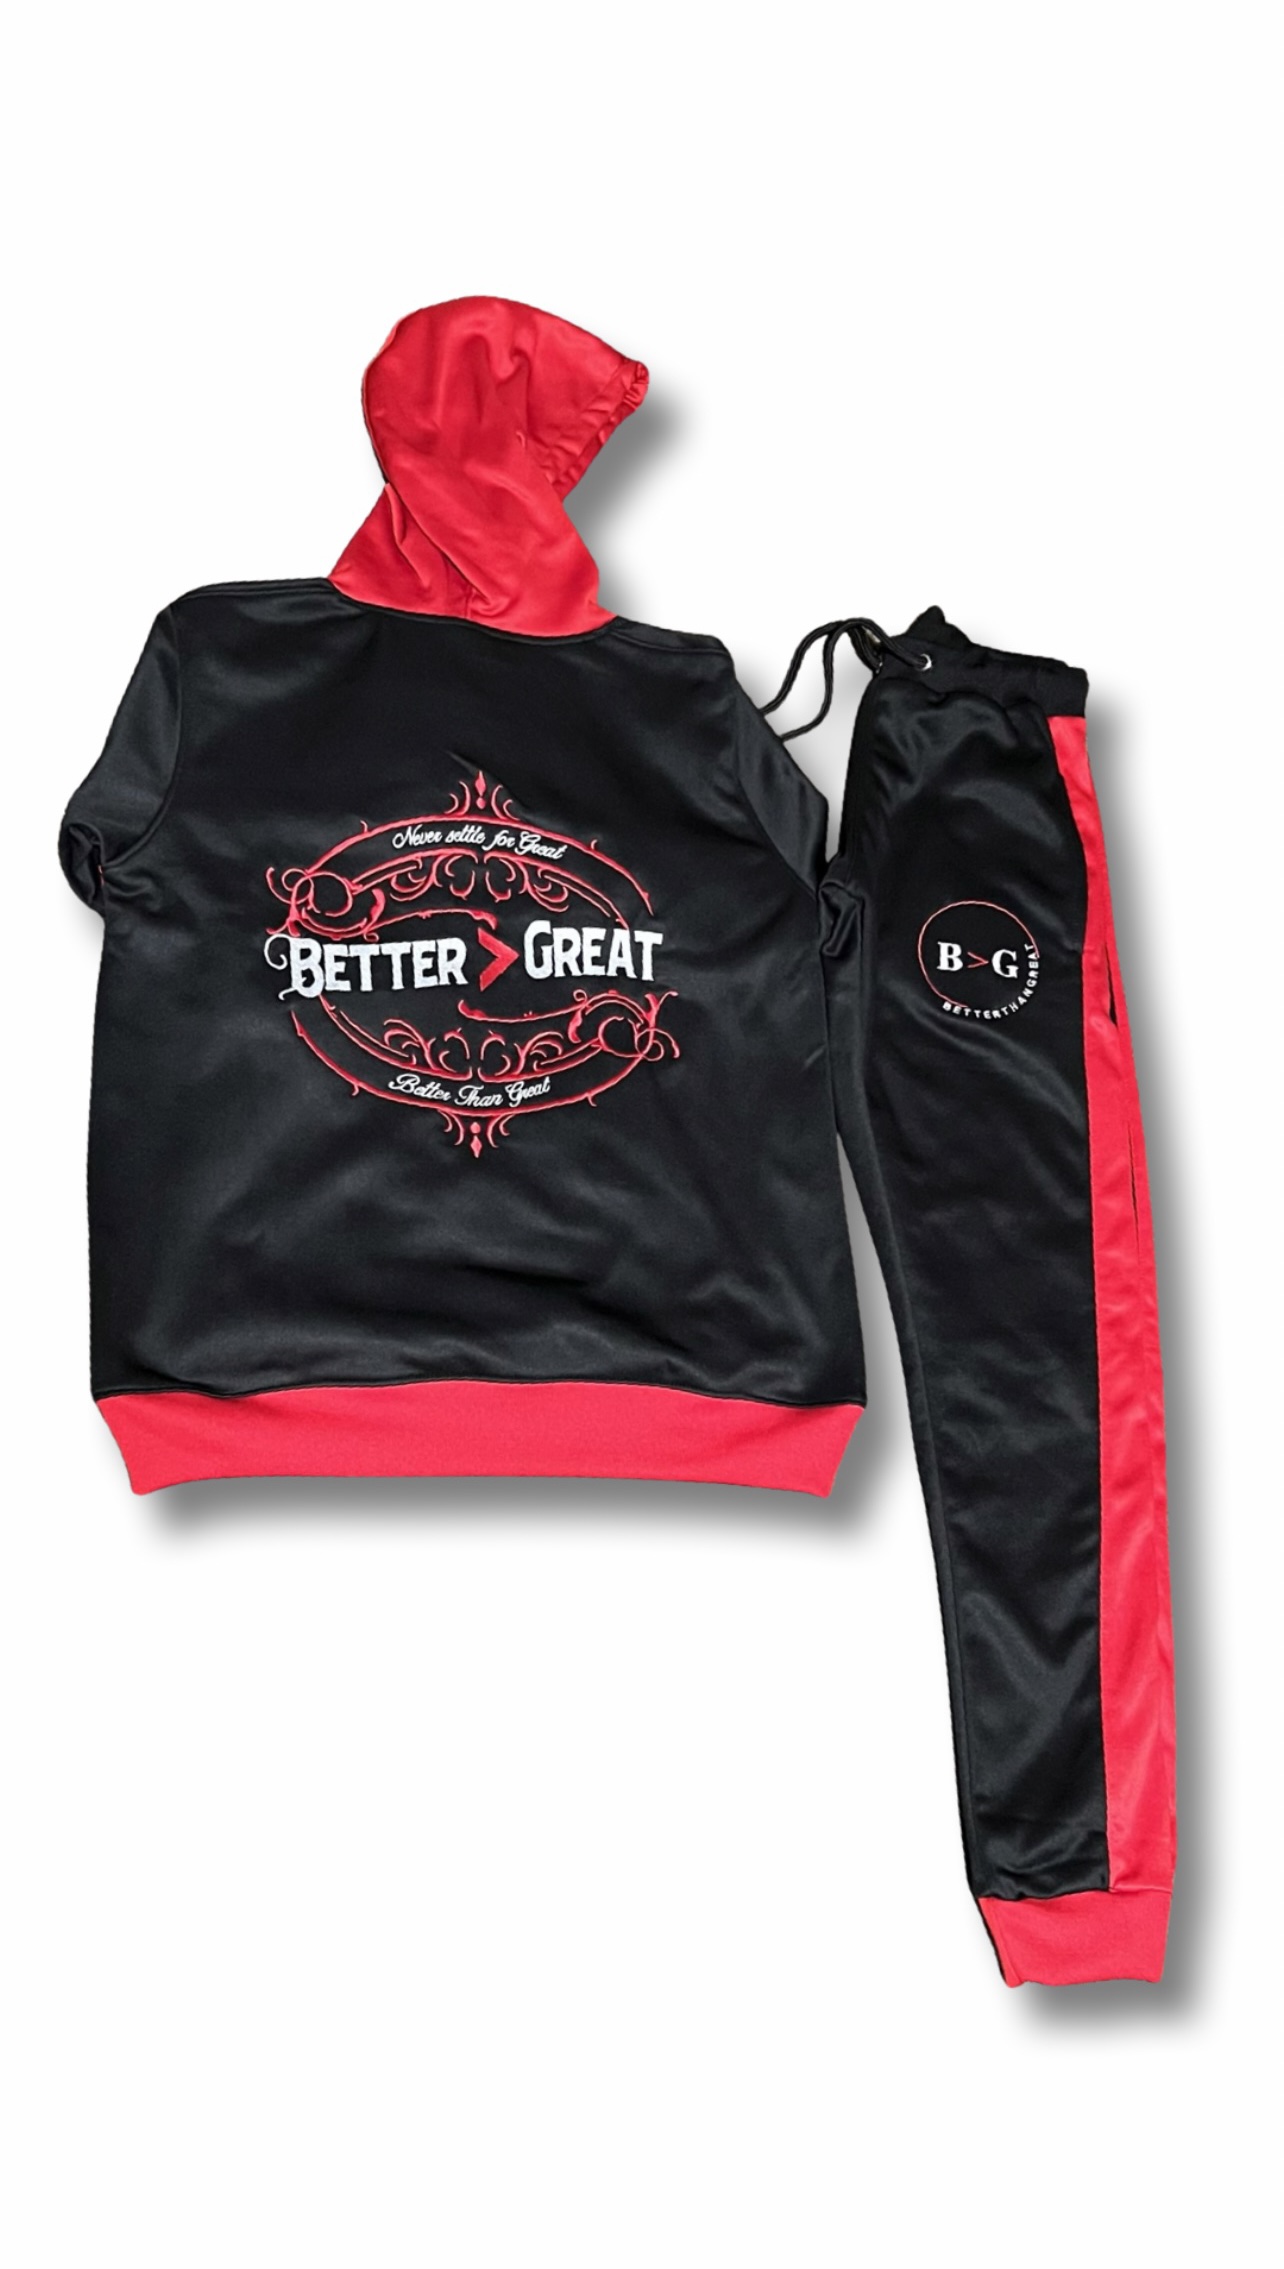 Better Than Great Black & Red Sweatsuit